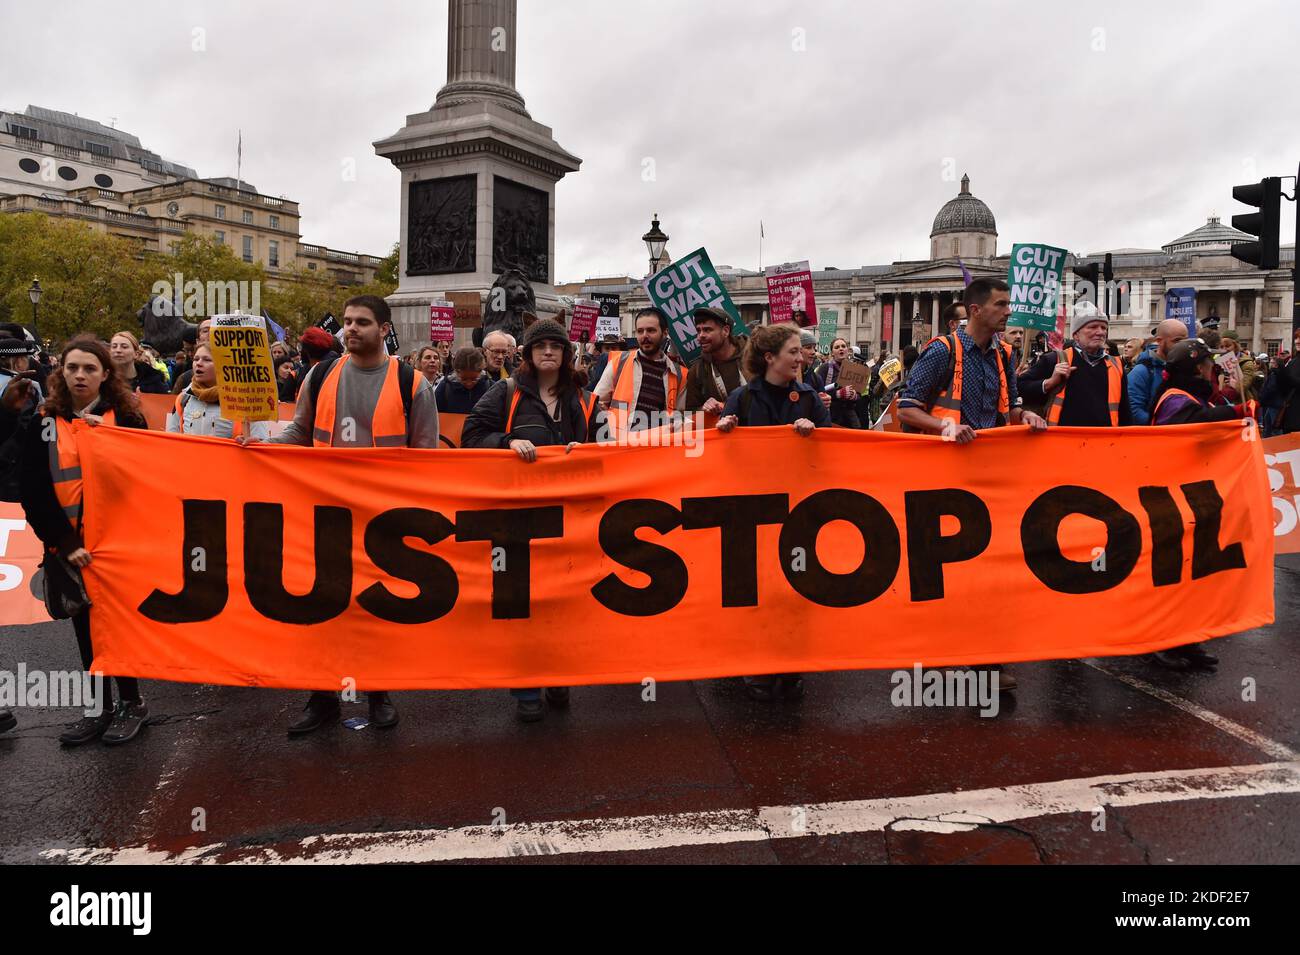 Climate activists group Just Stop Oil blocked the roads around Trafalgar Square during the National Anti Government demonstration, demanding to halt all future licensing and consents for the exploration, development and production of fossil fuels in the UK. Stock Photo